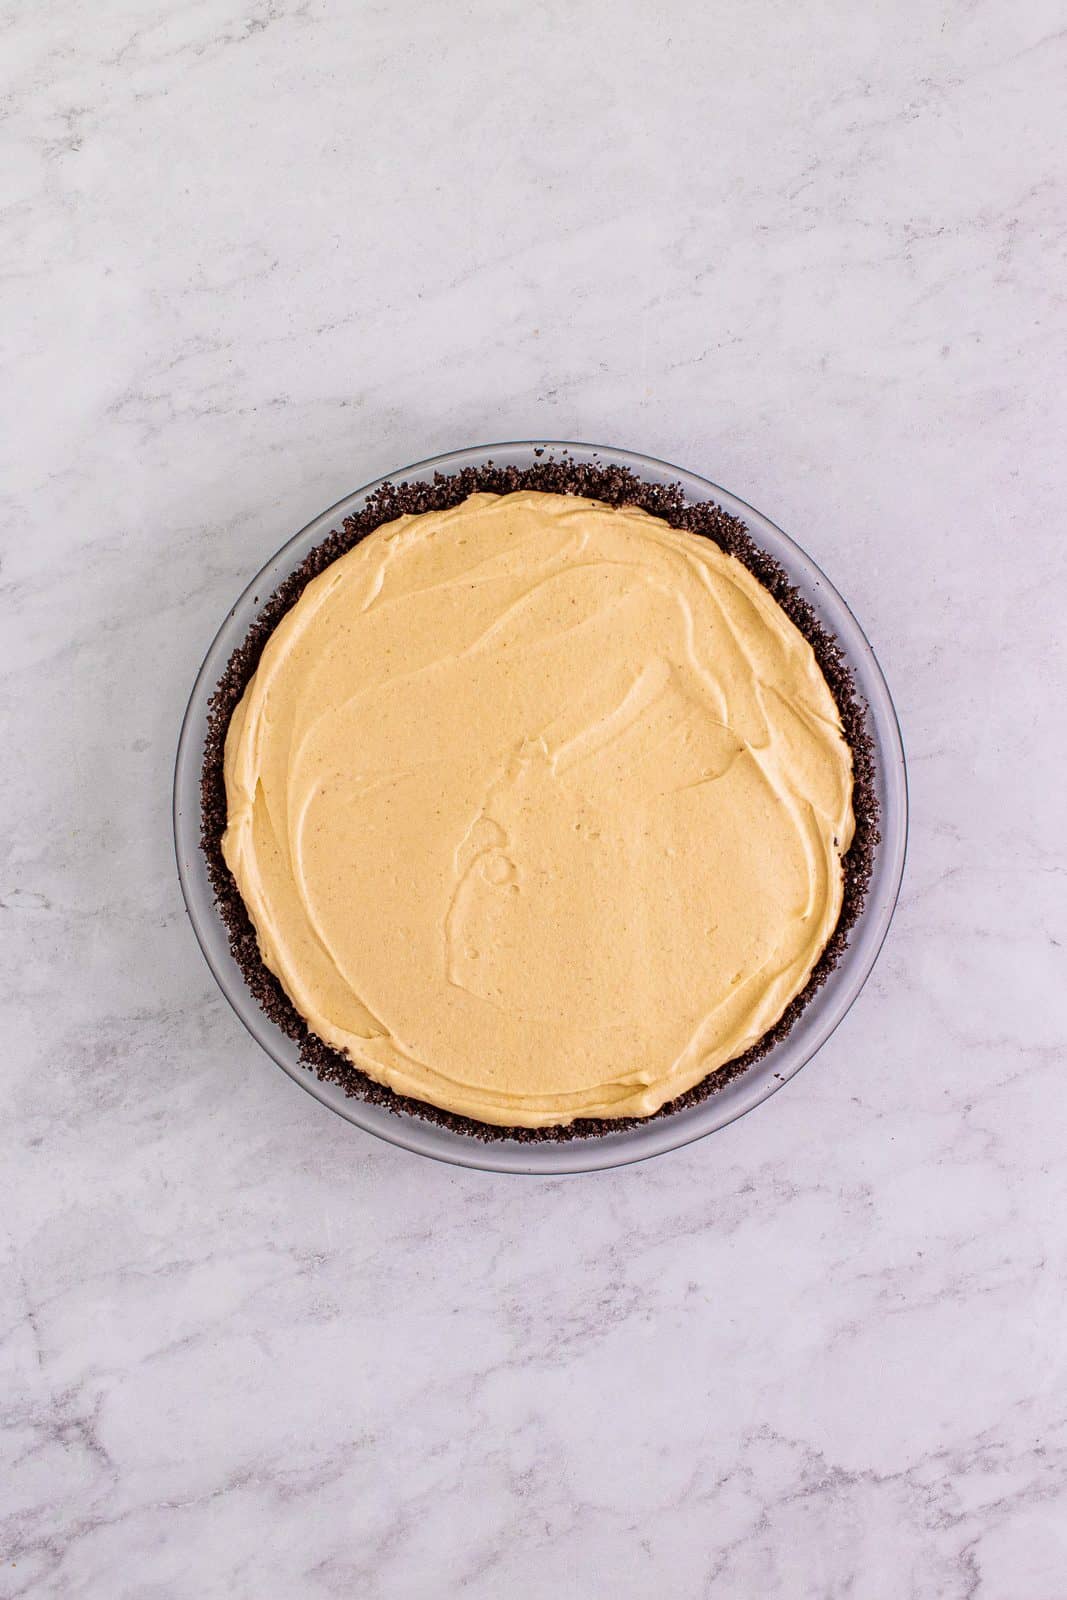 Peanut butter filling added to pie crust.